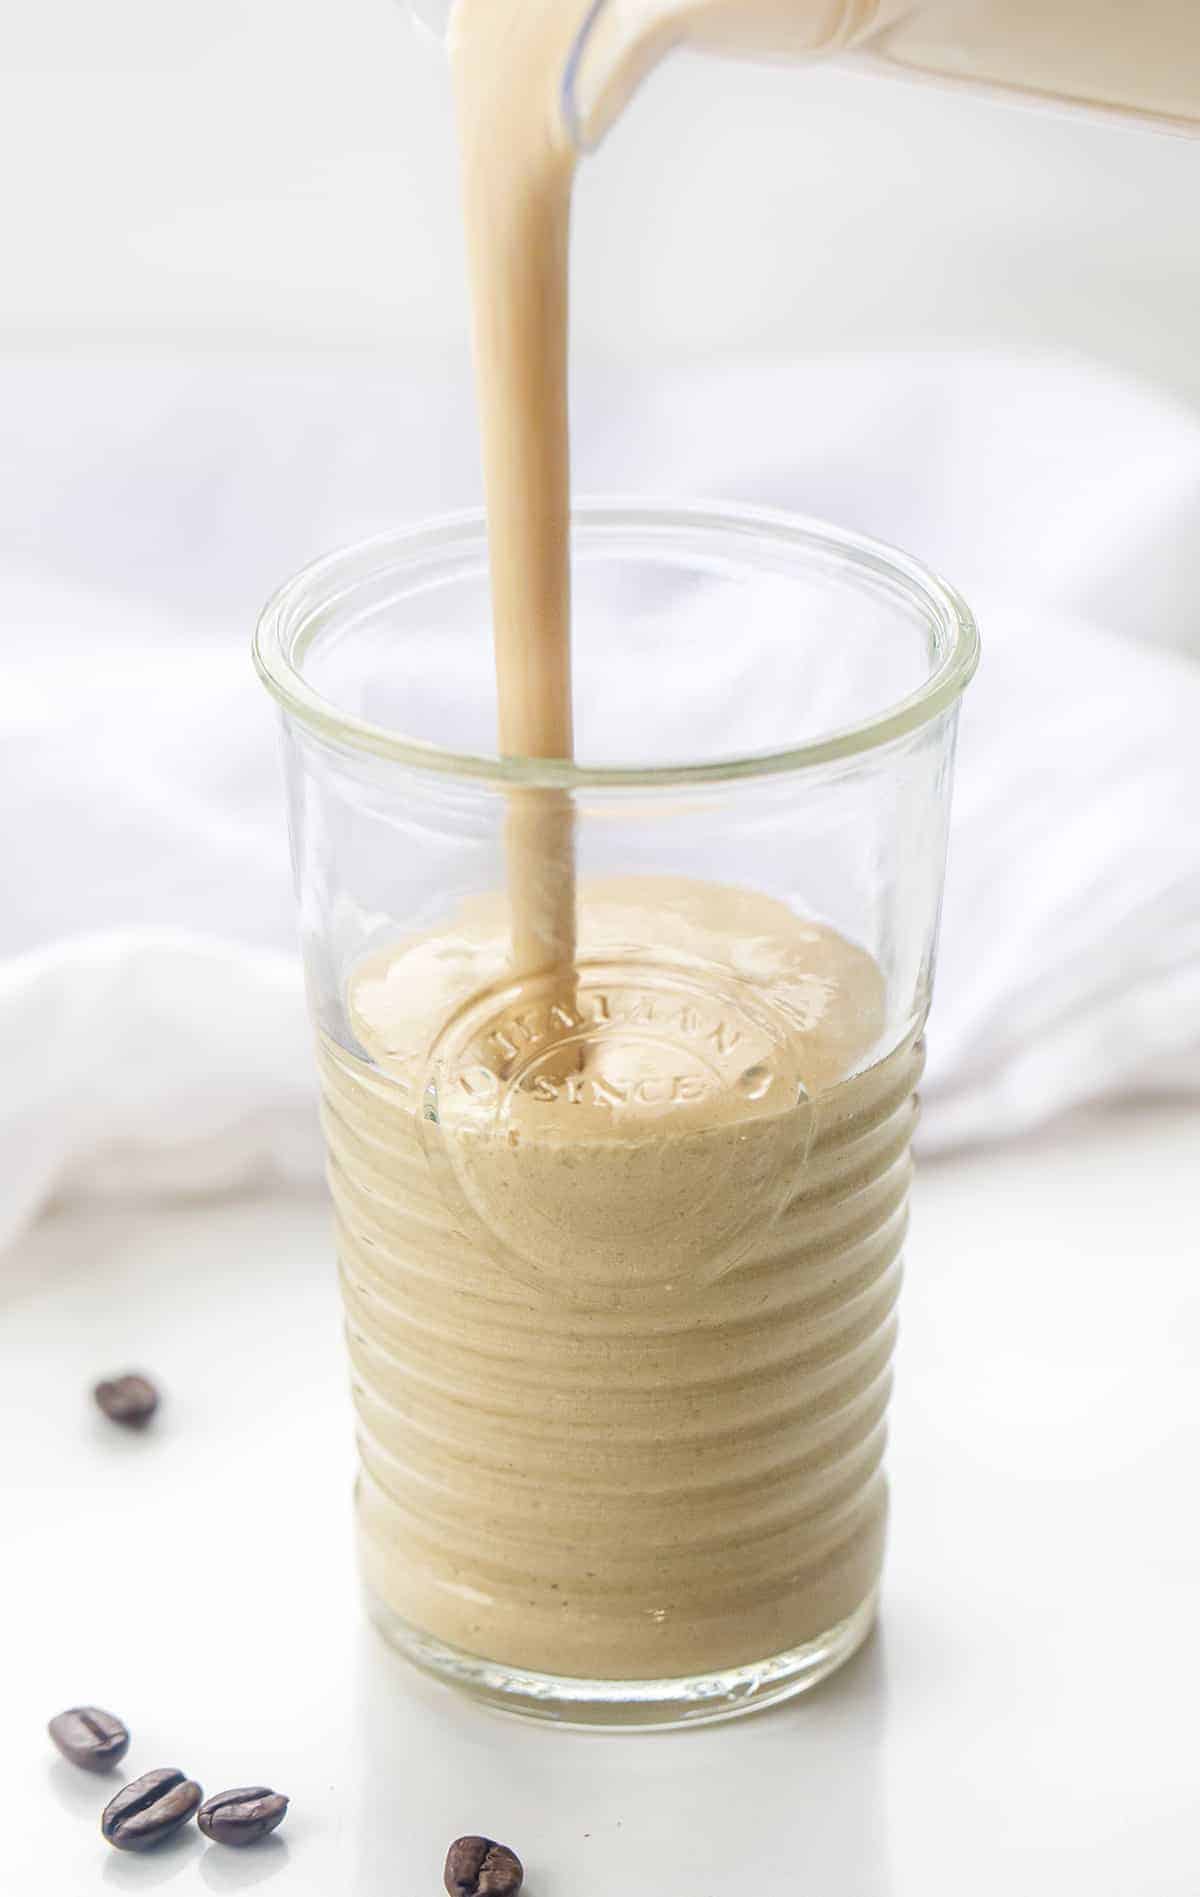 Pouring Coffee Breakfast Smoothie - Good Morning Smoothie Into a Glass.